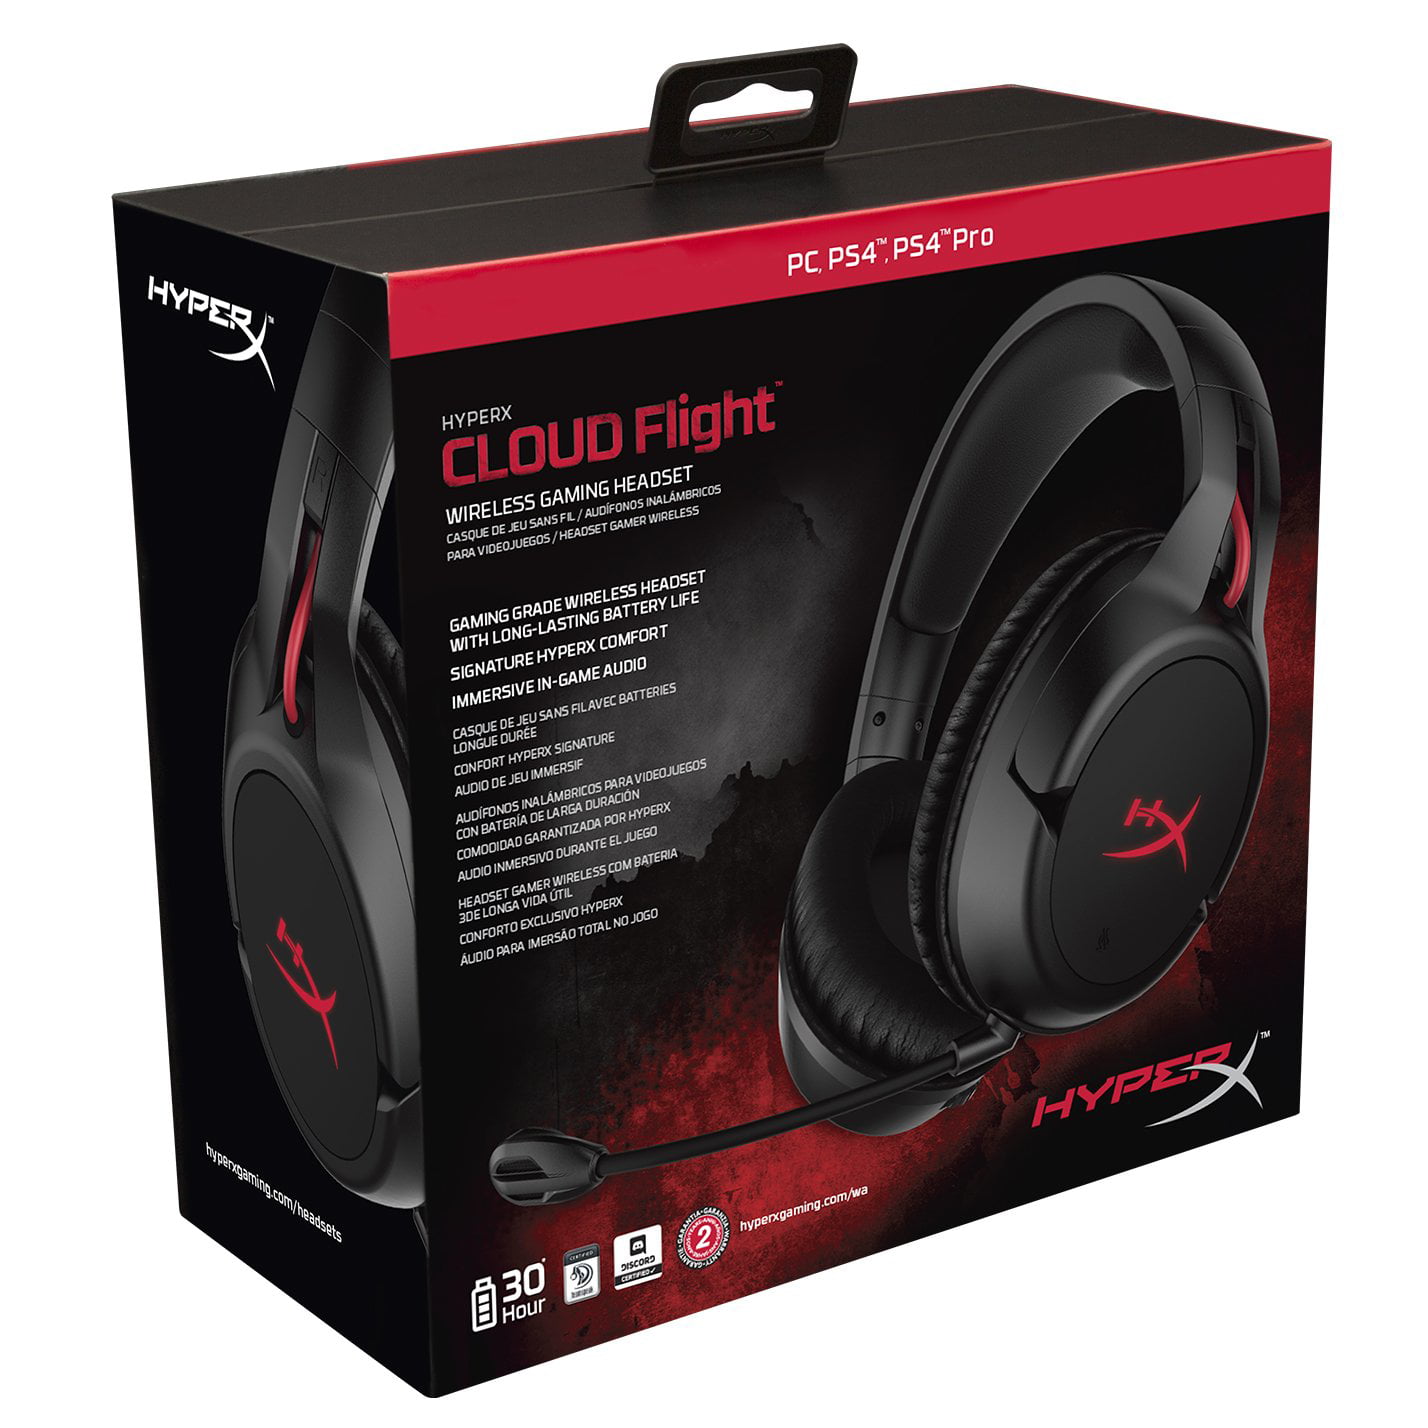 PS4 Wireless Gaming Headset Bass Red LED Light Detachable Noise Cancelling Microphone PS4 Pro HyperX Cloud Flight Comfortable Memory Foam Renewed Battery Lasts Up to 30 hours of Use PC 